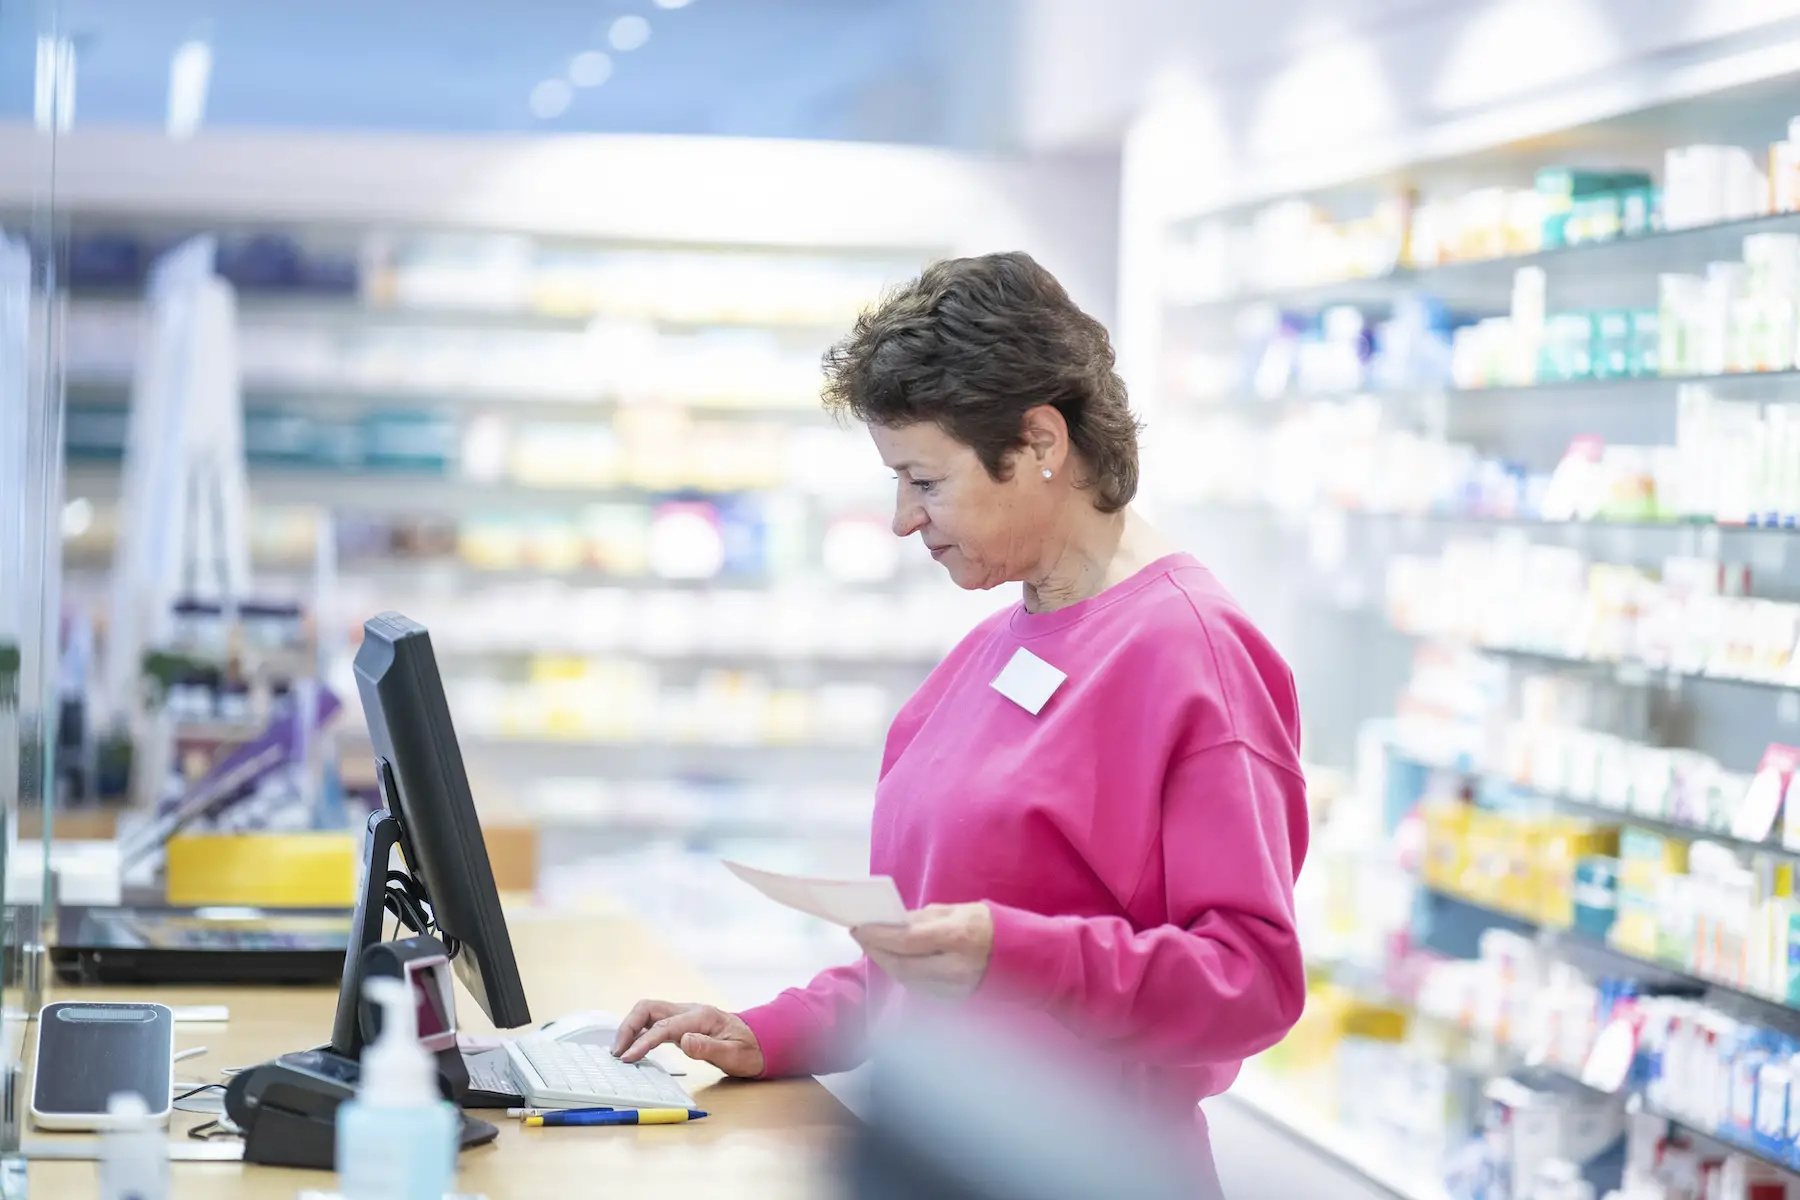 Pharmacist behind the counter enters prescription information into a computer